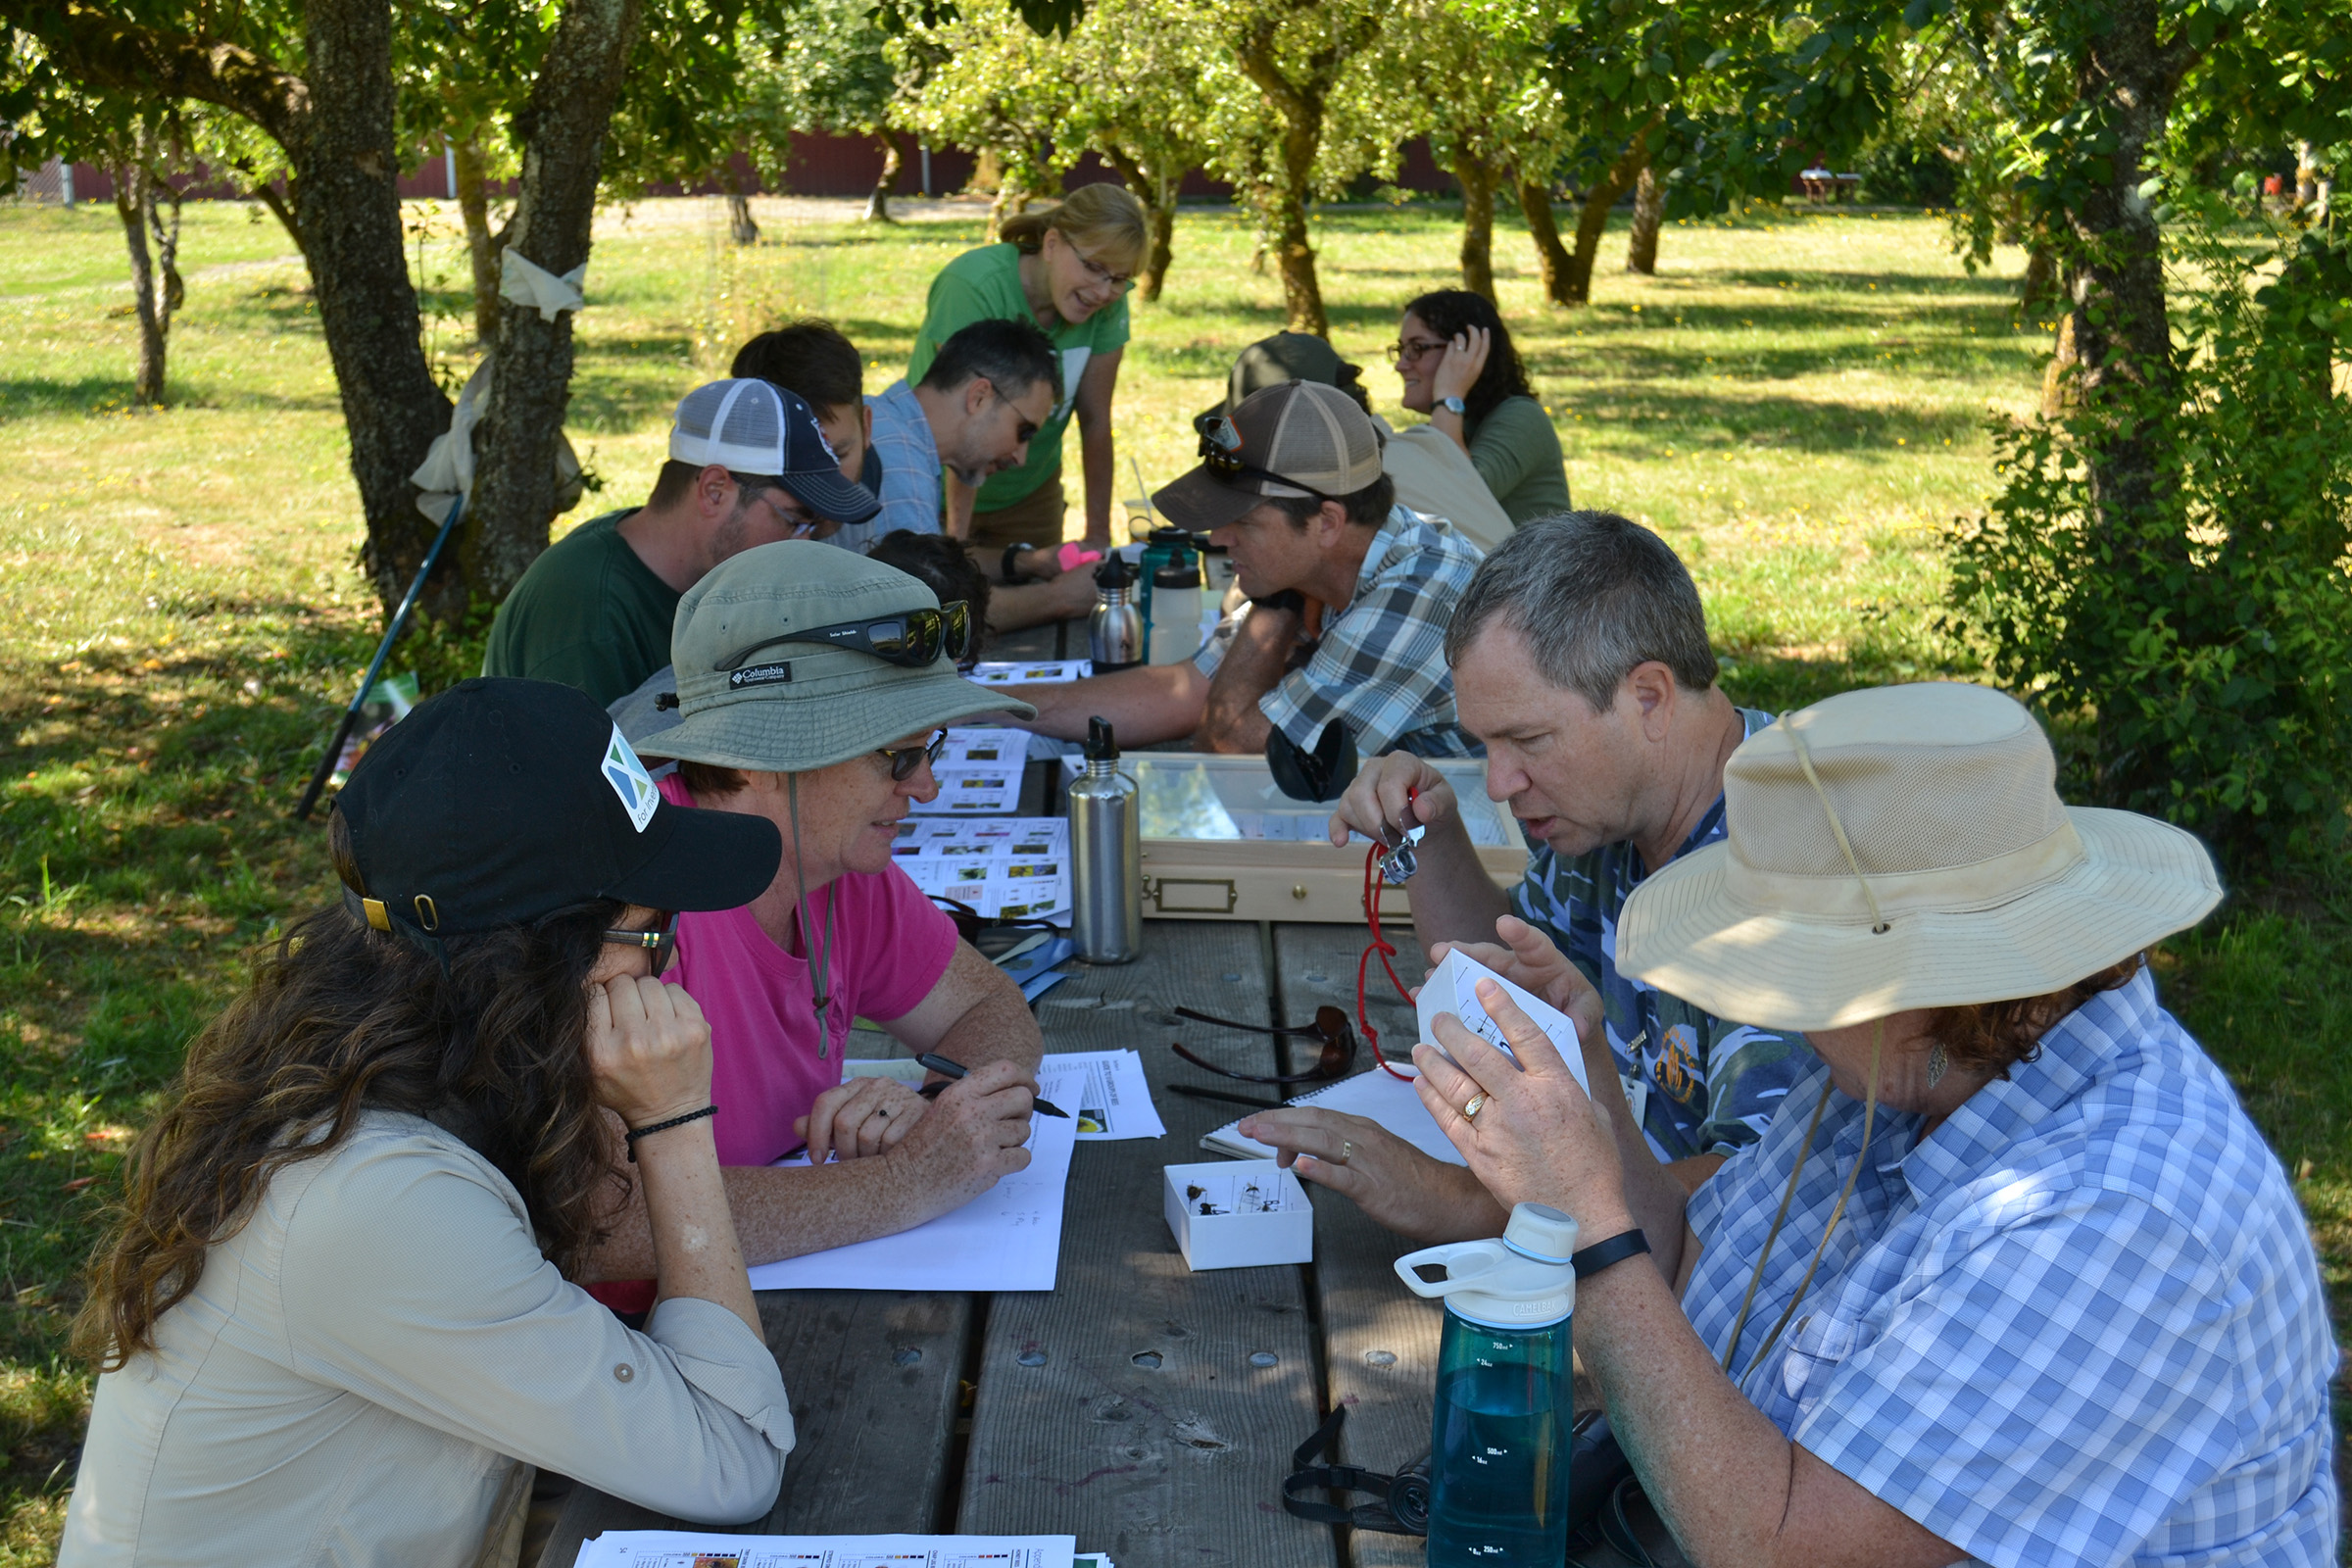 In the dappled shade of an old orchard, a group of people sit round a table looking at and actively discussing native bee specimens